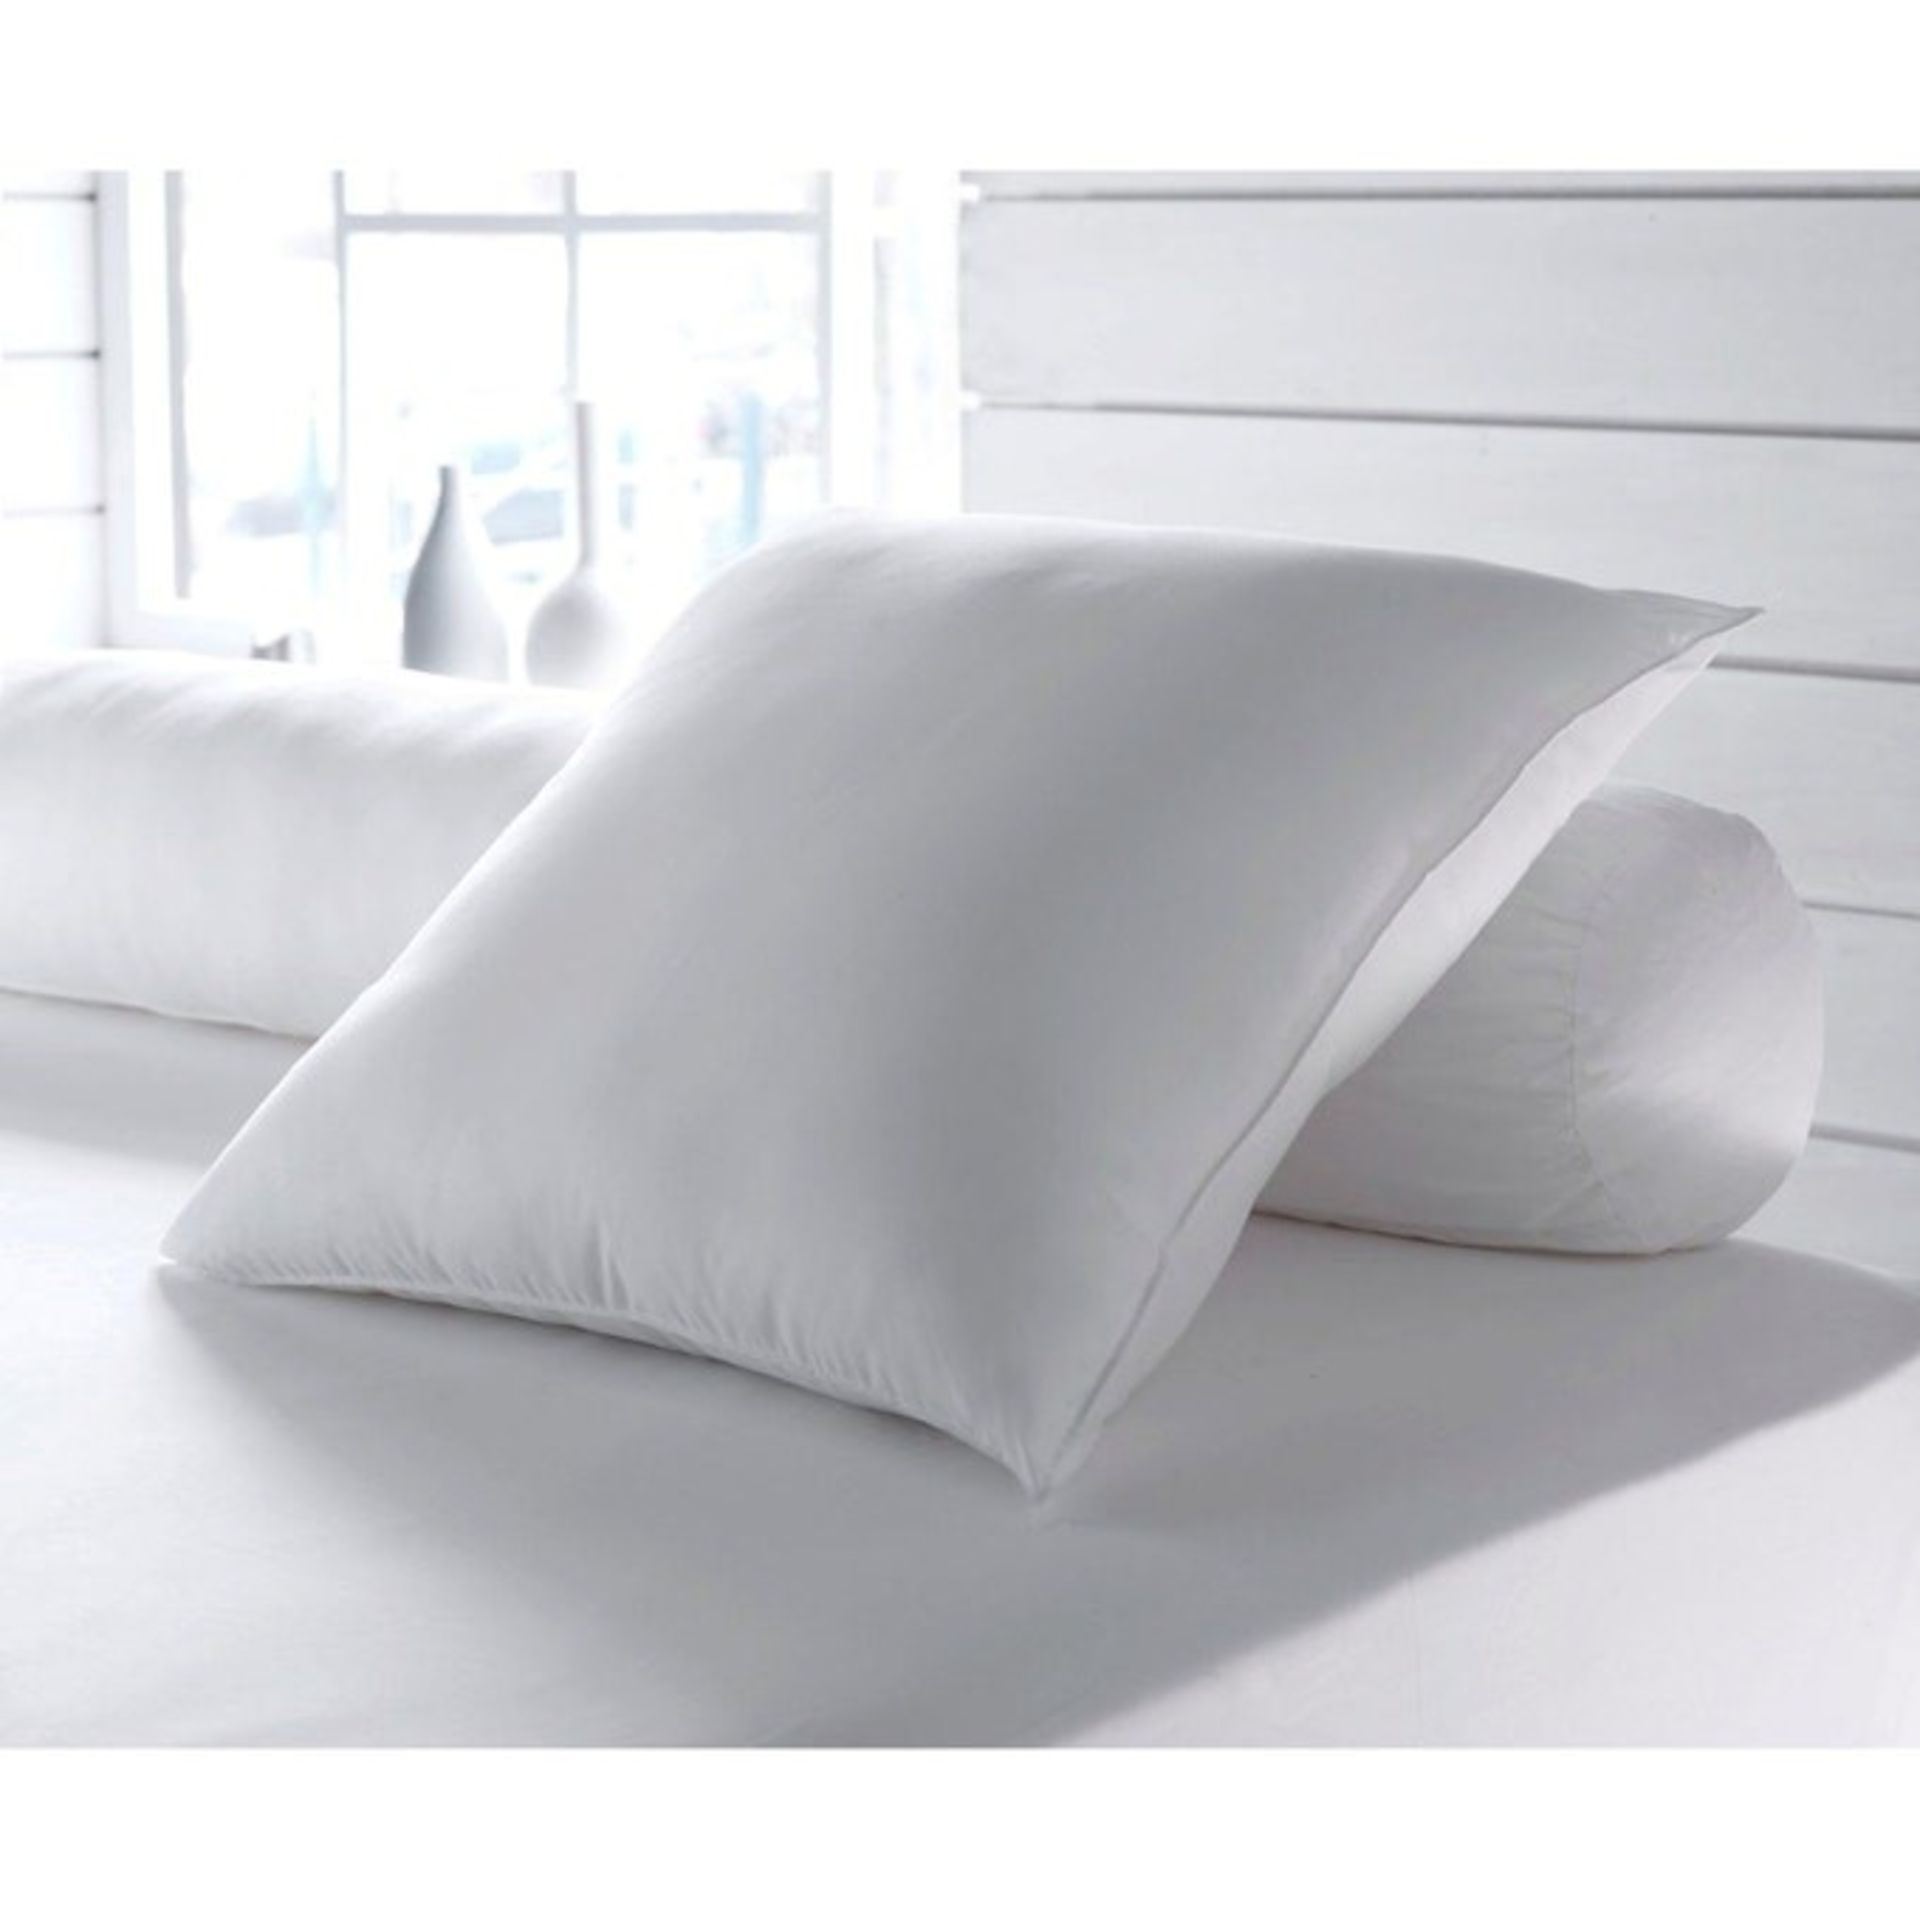 1 GRADE A BAGGED DESIGNER DODO SYNTHETIC SOFT SQUARE PILLOW IN WHITE / SIZE: APPROX 65X65CM / RRP £